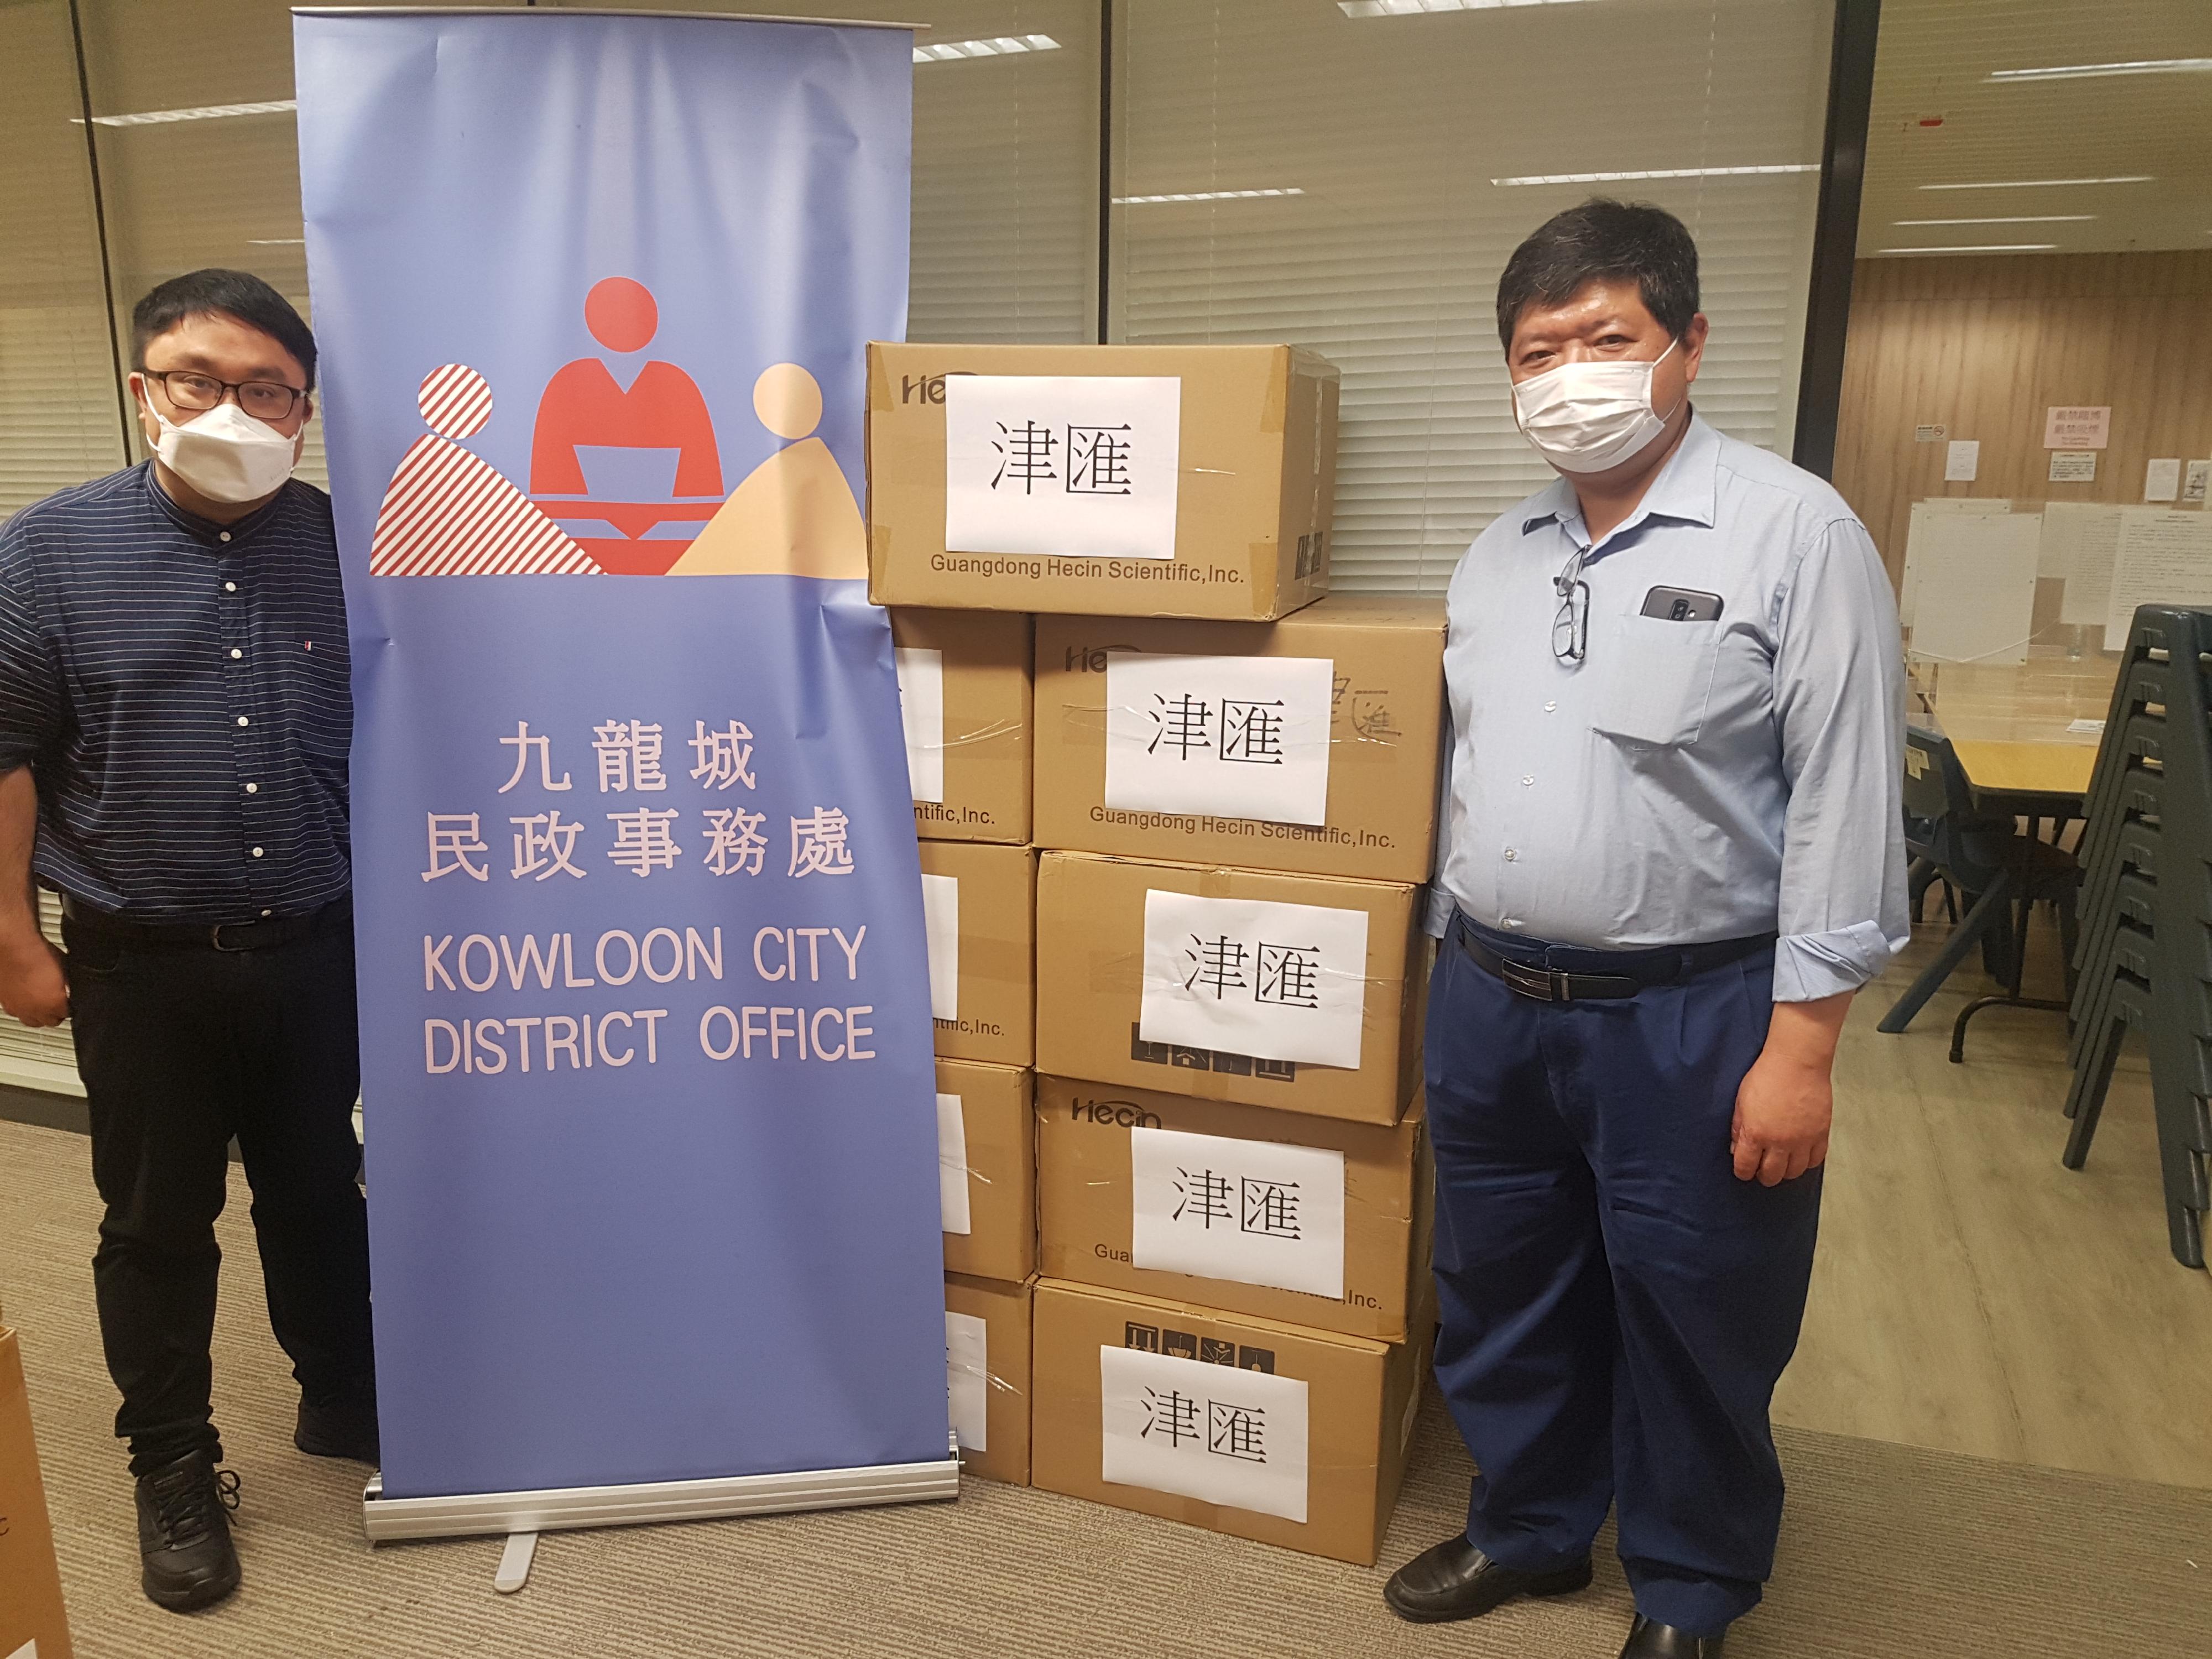 The Kowloon City District Office today (May 25) distributed COVID-19 rapid test kits to households, cleansing workers and property management staff living and working in City Hub for voluntary testing through the property management company.